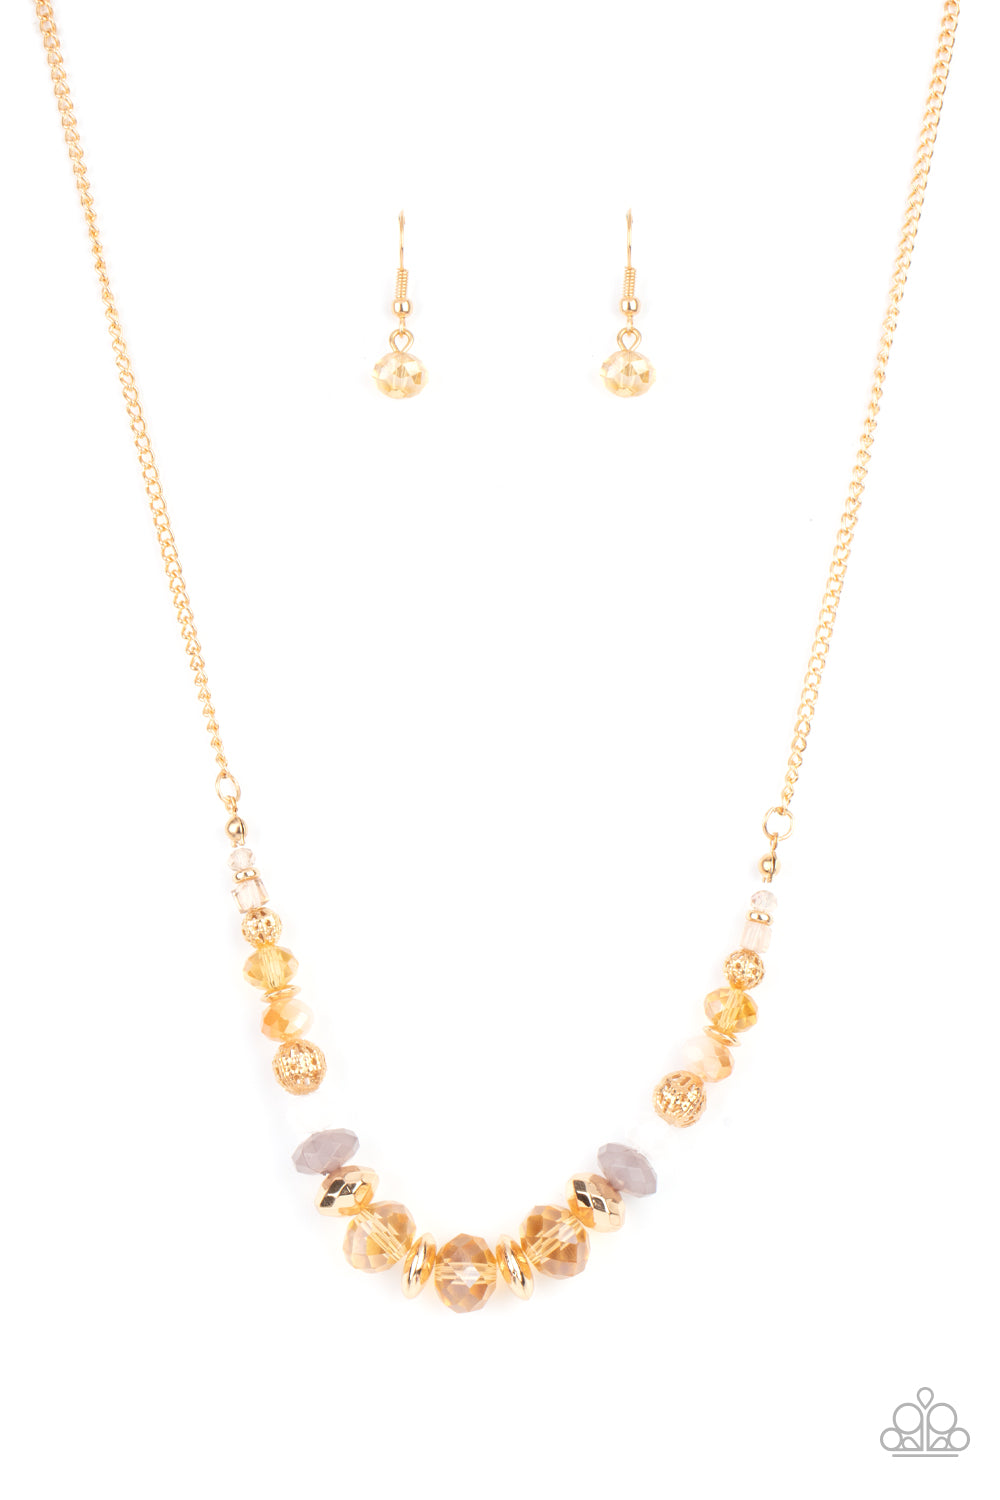 Turn Up The Tea Lights - Gold necklace 2231